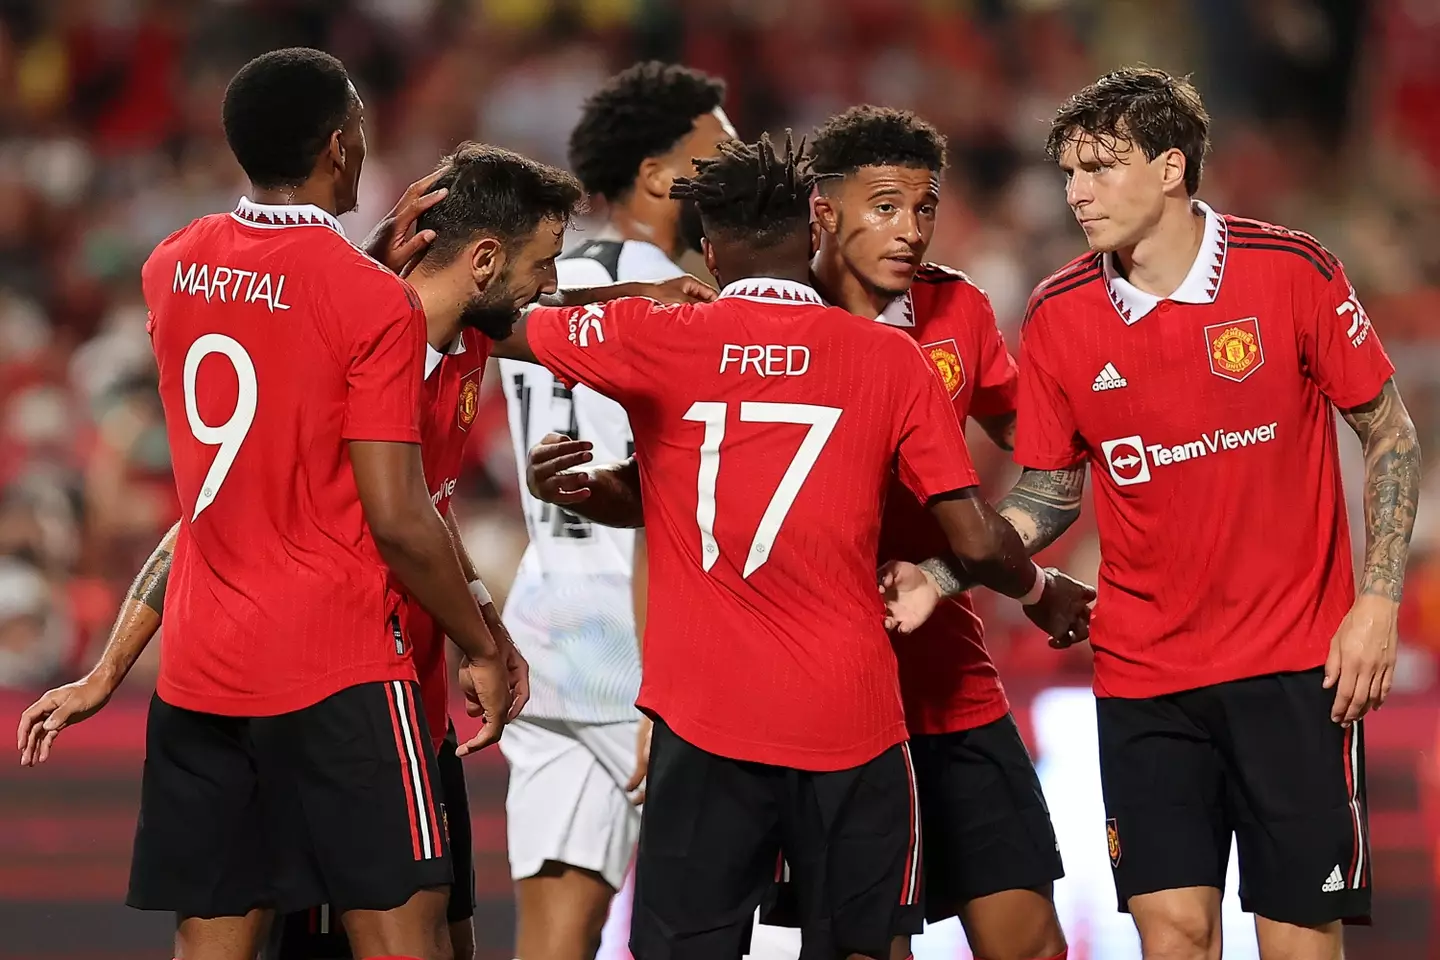 The squad celebrates during the first half of an eventual victory over Liverpool. (Man Utd)